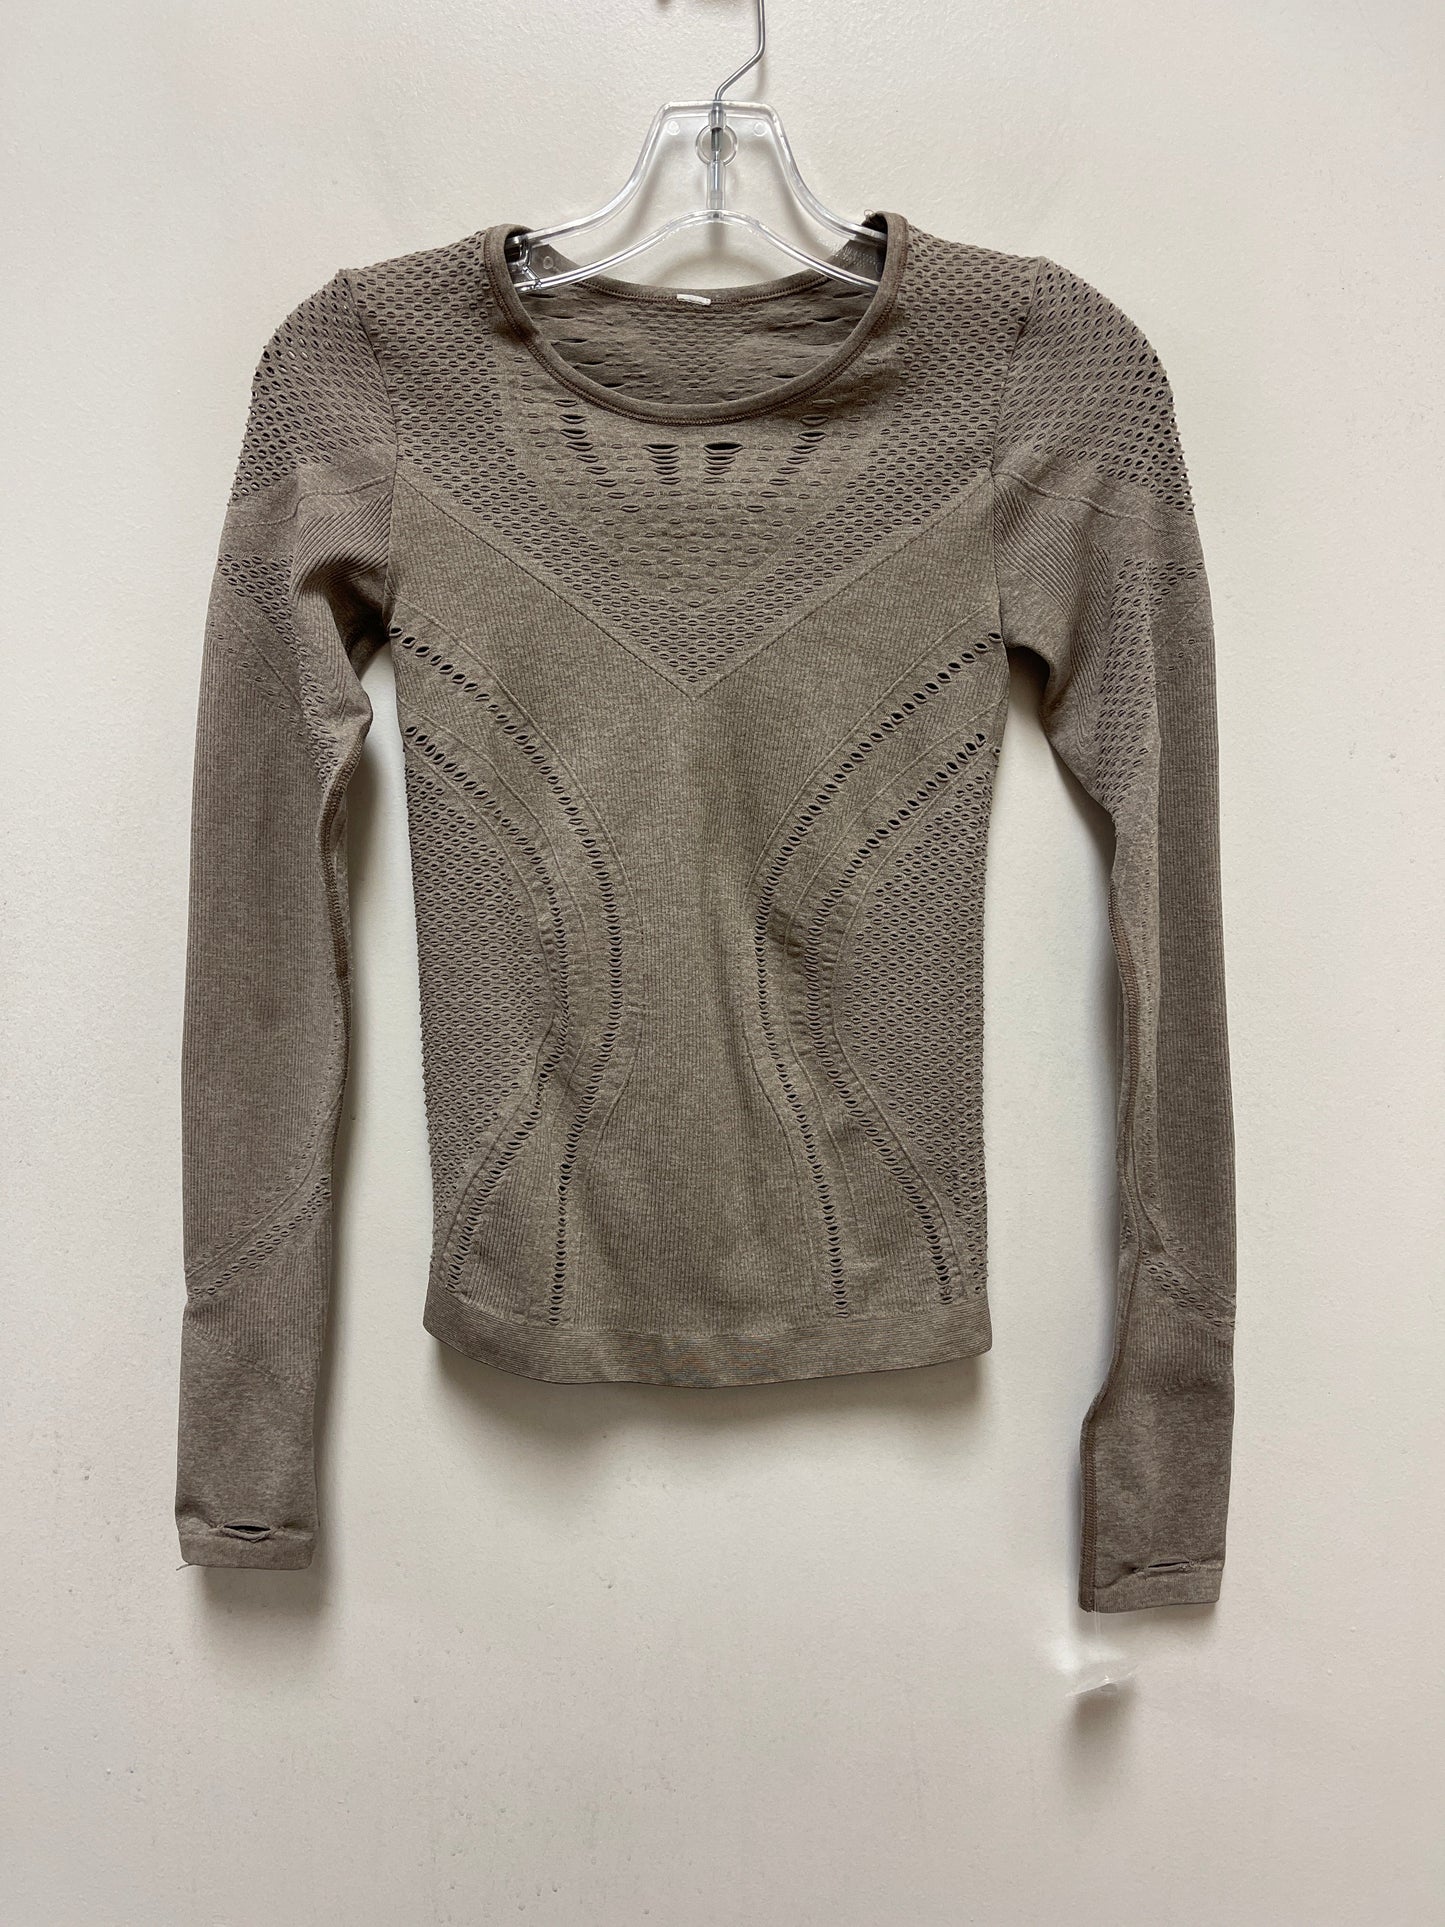 Brown Athletic Top Long Sleeve Crewneck Alo, Size S